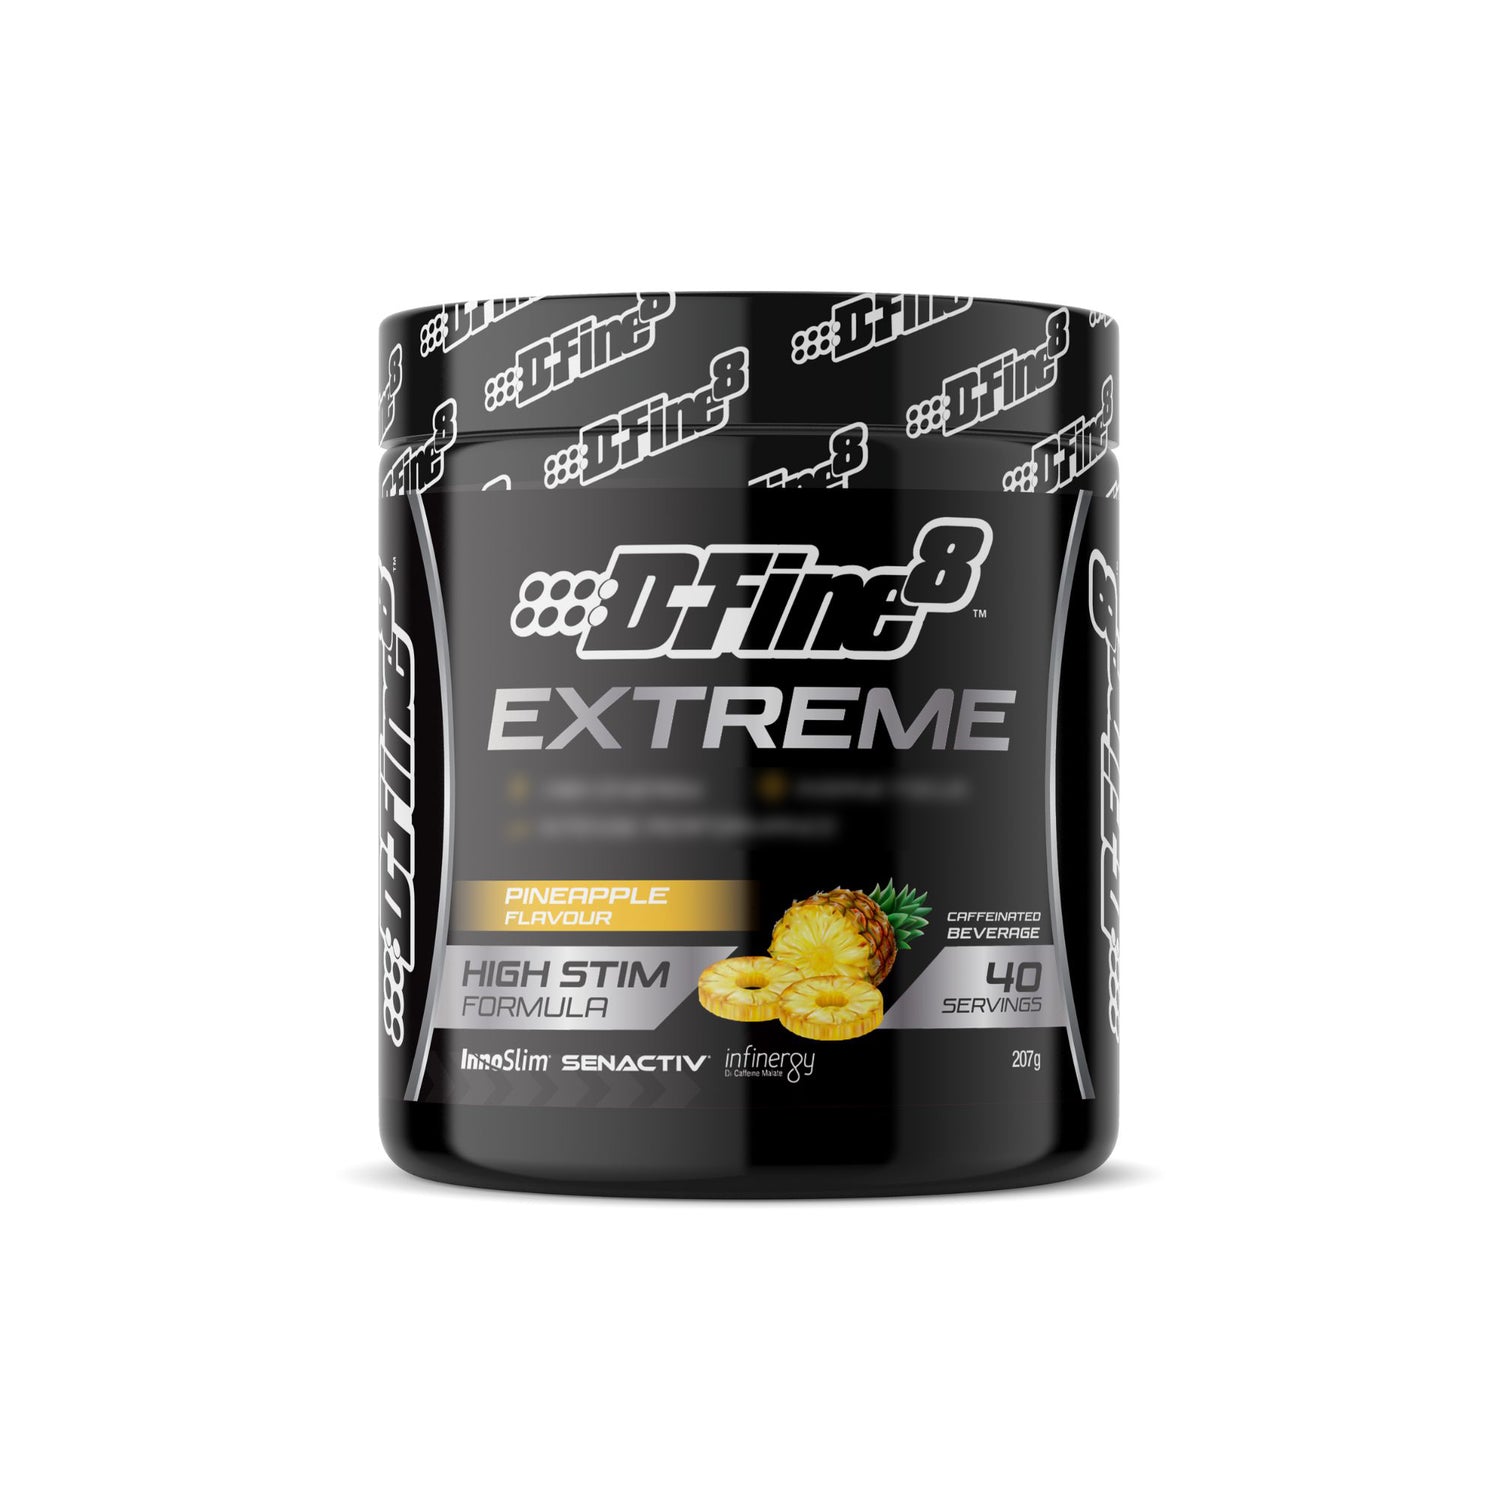 Musclewerks D-Fine8 Extreme